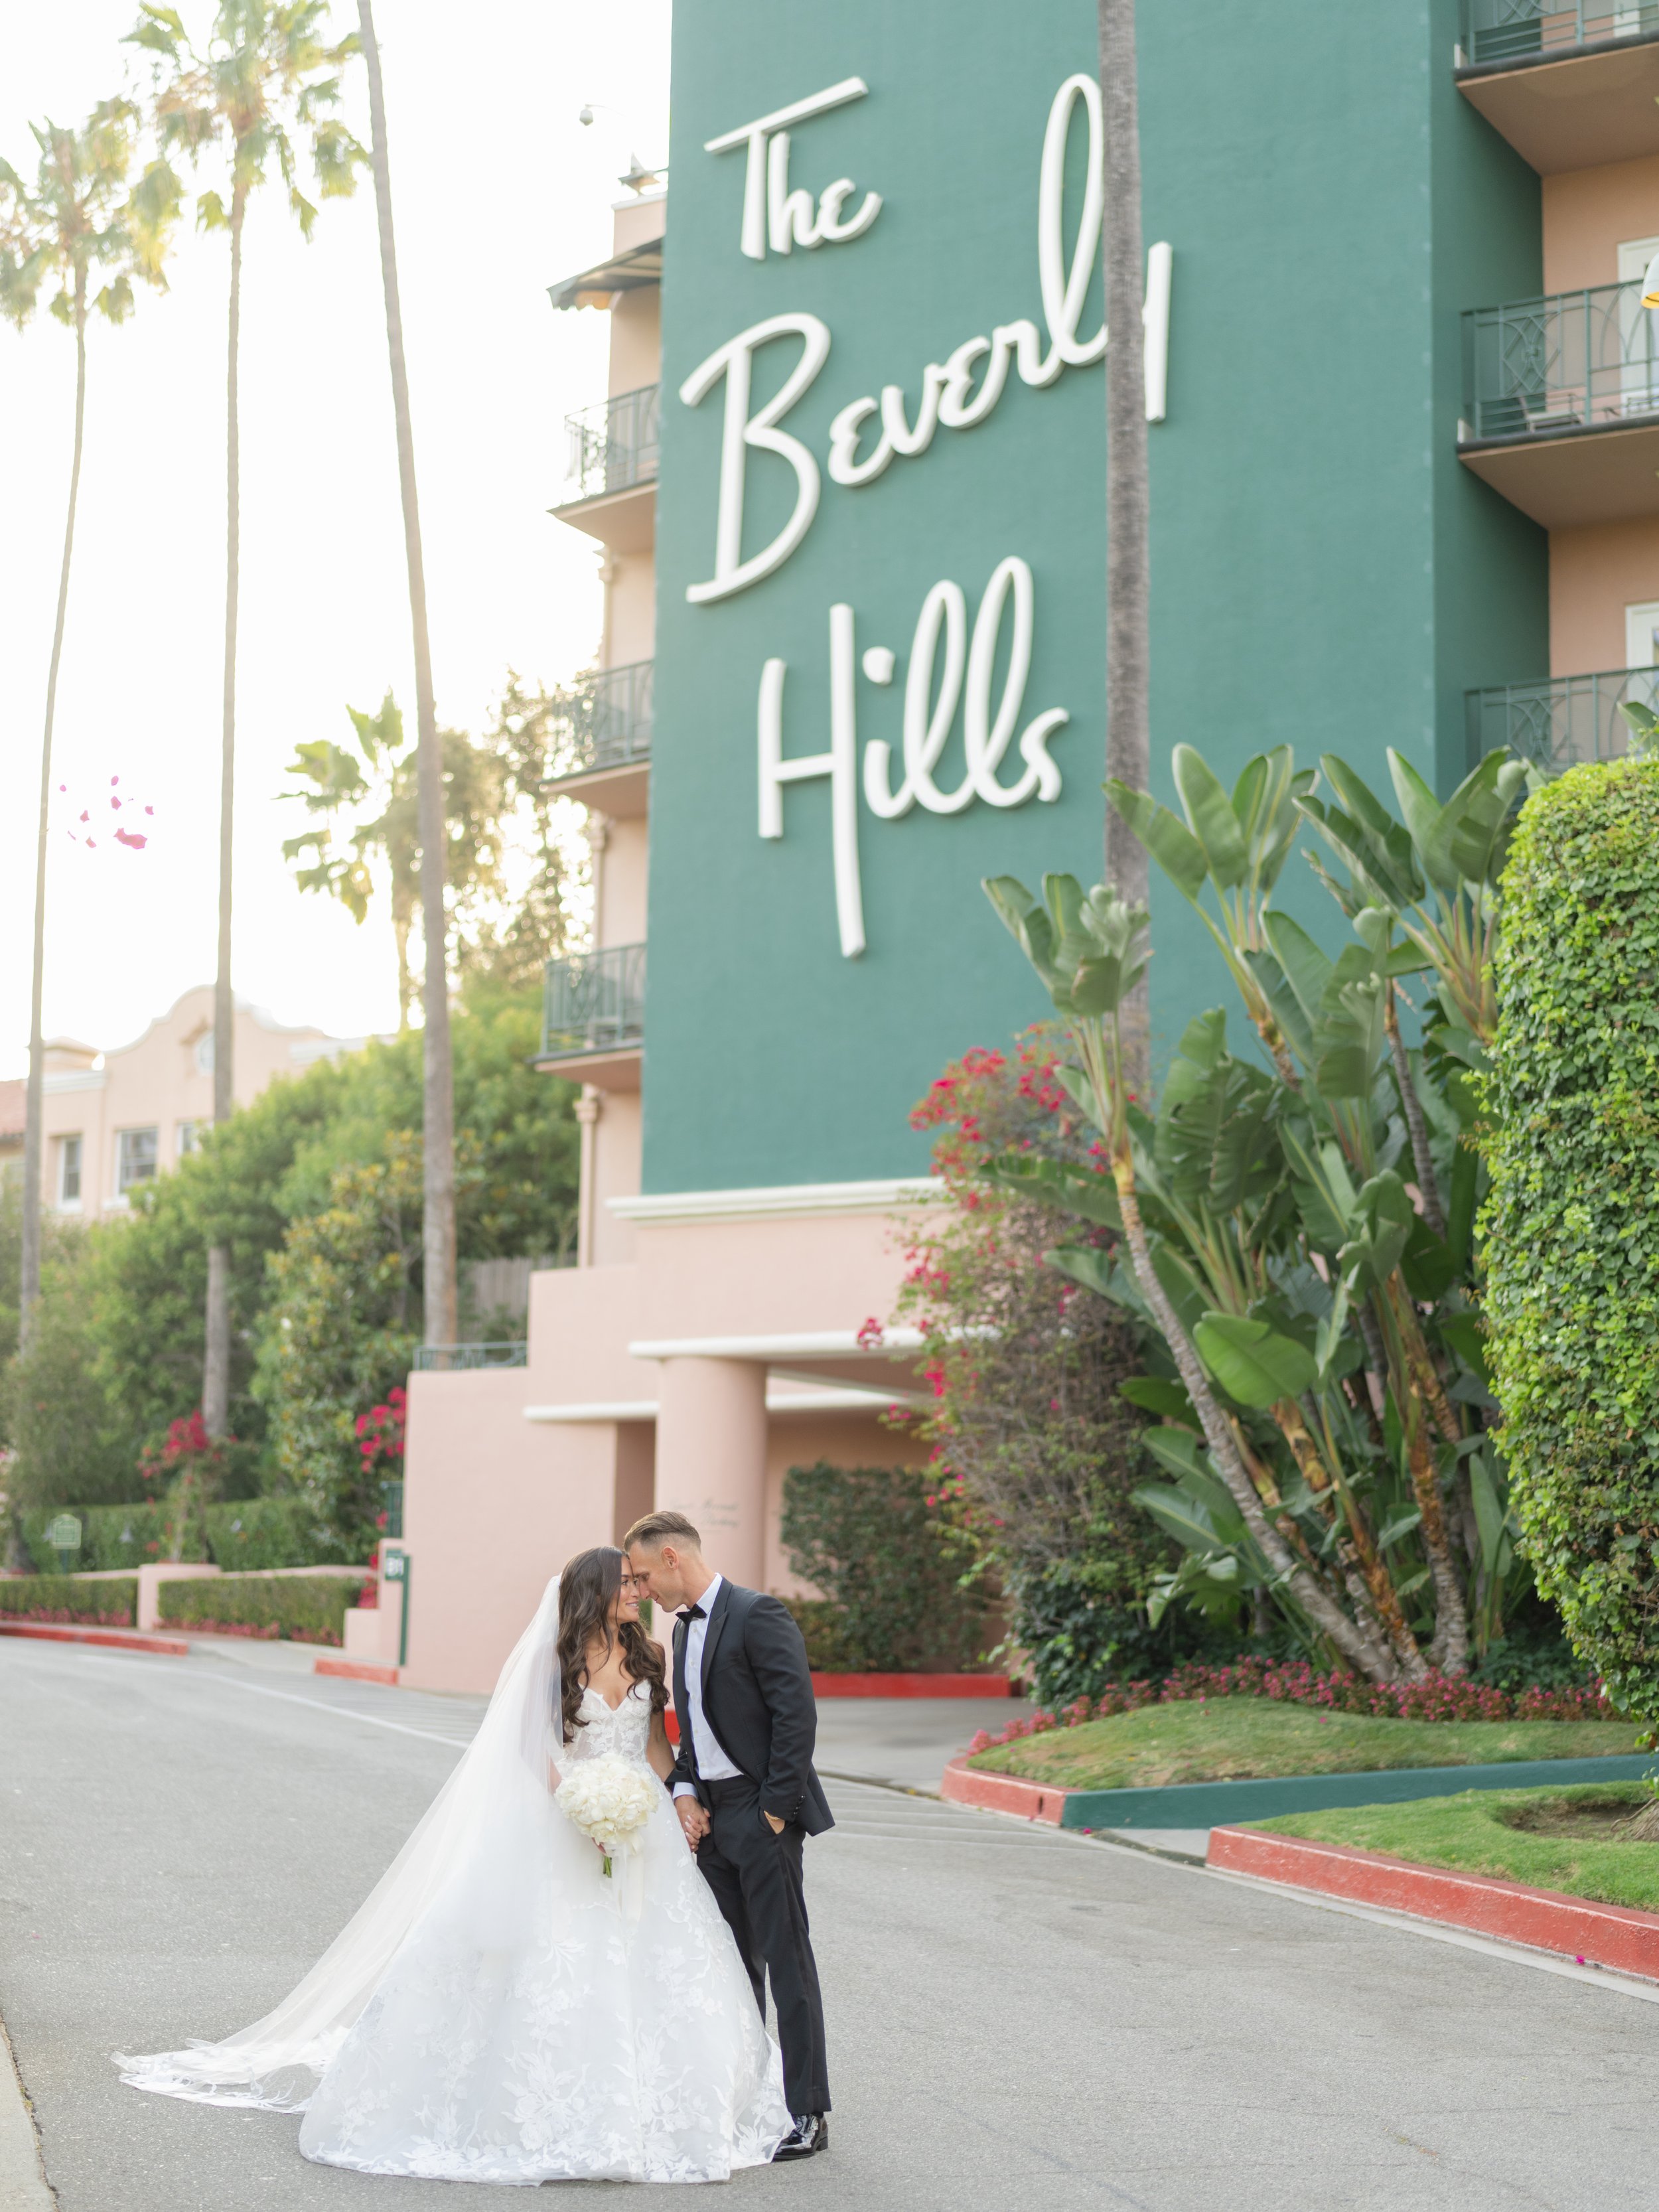 Beverly Hills wedding Monique Lhuillier bride with Michael Costelo veil in front of Beverly Hills Hotel iconic sign by luxury wedding photographer Amanda Watson